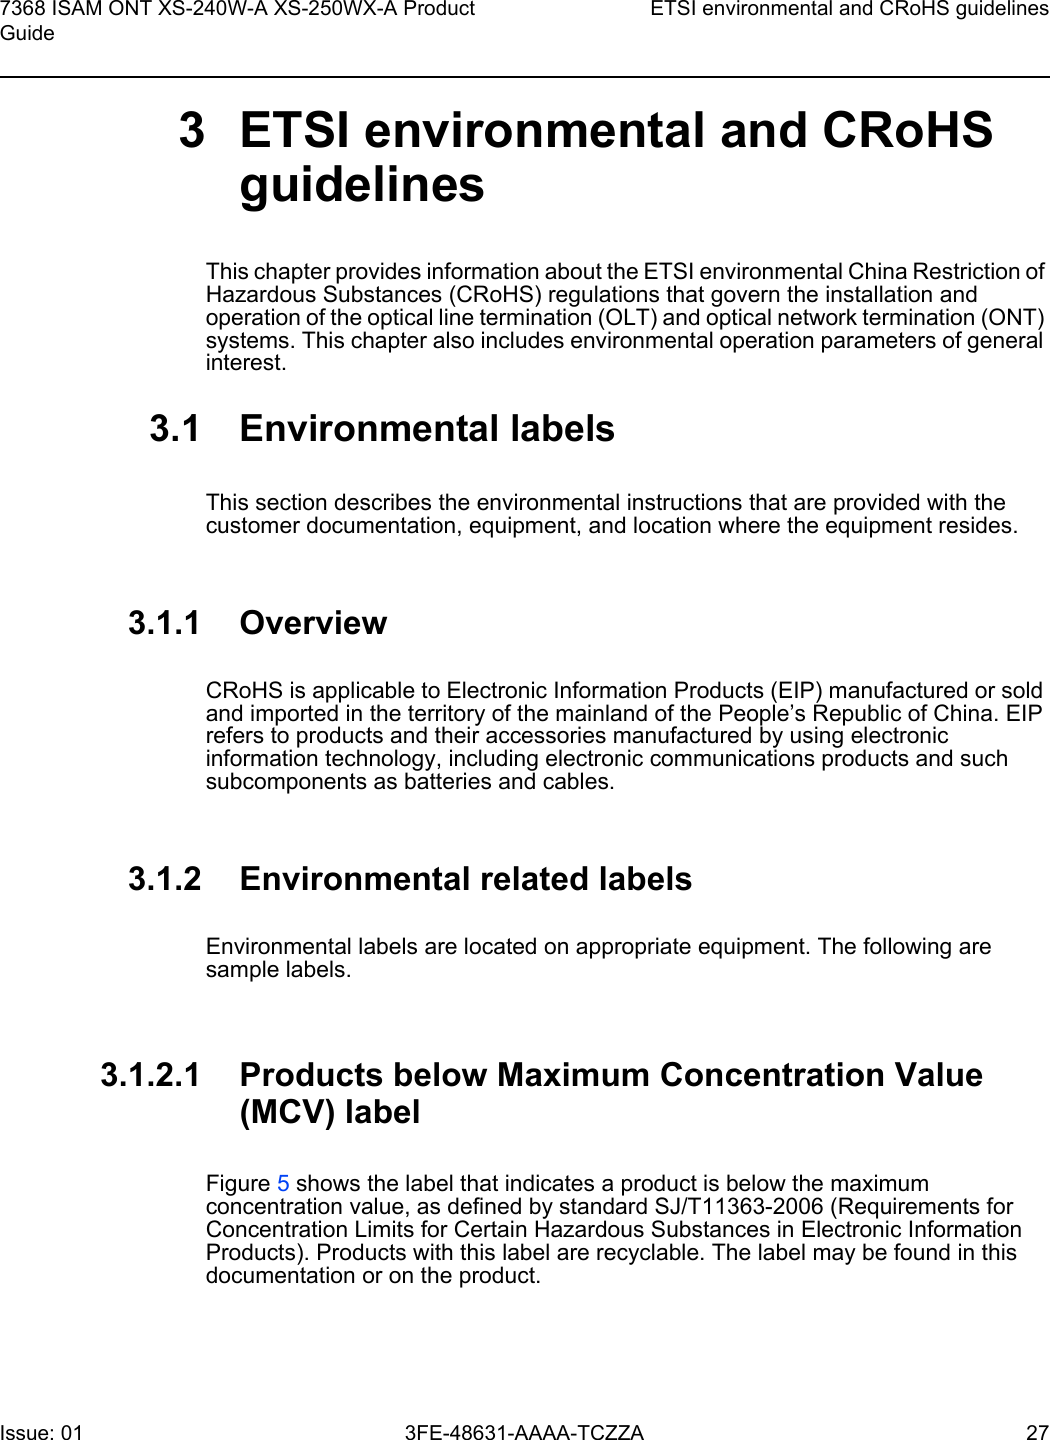 7368 ISAM ONT XS-240W-A XS-250WX-A Product GuideETSI environmental and CRoHS guidelinesIssue: 01 3FE-48631-AAAA-TCZZA 27 3 ETSI environmental and CRoHS guidelinesThis chapter provides information about the ETSI environmental China Restriction of Hazardous Substances (CRoHS) regulations that govern the installation and operation of the optical line termination (OLT) and optical network termination (ONT) systems. This chapter also includes environmental operation parameters of general interest.3.1 Environmental labelsThis section describes the environmental instructions that are provided with the customer documentation, equipment, and location where the equipment resides.3.1.1 OverviewCRoHS is applicable to Electronic Information Products (EIP) manufactured or sold and imported in the territory of the mainland of the People’s Republic of China. EIP refers to products and their accessories manufactured by using electronic information technology, including electronic communications products and such subcomponents as batteries and cables.3.1.2 Environmental related labelsEnvironmental labels are located on appropriate equipment. The following are sample labels.3.1.2.1 Products below Maximum Concentration Value (MCV) labelFigure 5 shows the label that indicates a product is below the maximum concentration value, as defined by standard SJ/T11363-2006 (Requirements for Concentration Limits for Certain Hazardous Substances in Electronic Information Products). Products with this label are recyclable. The label may be found in this documentation or on the product.